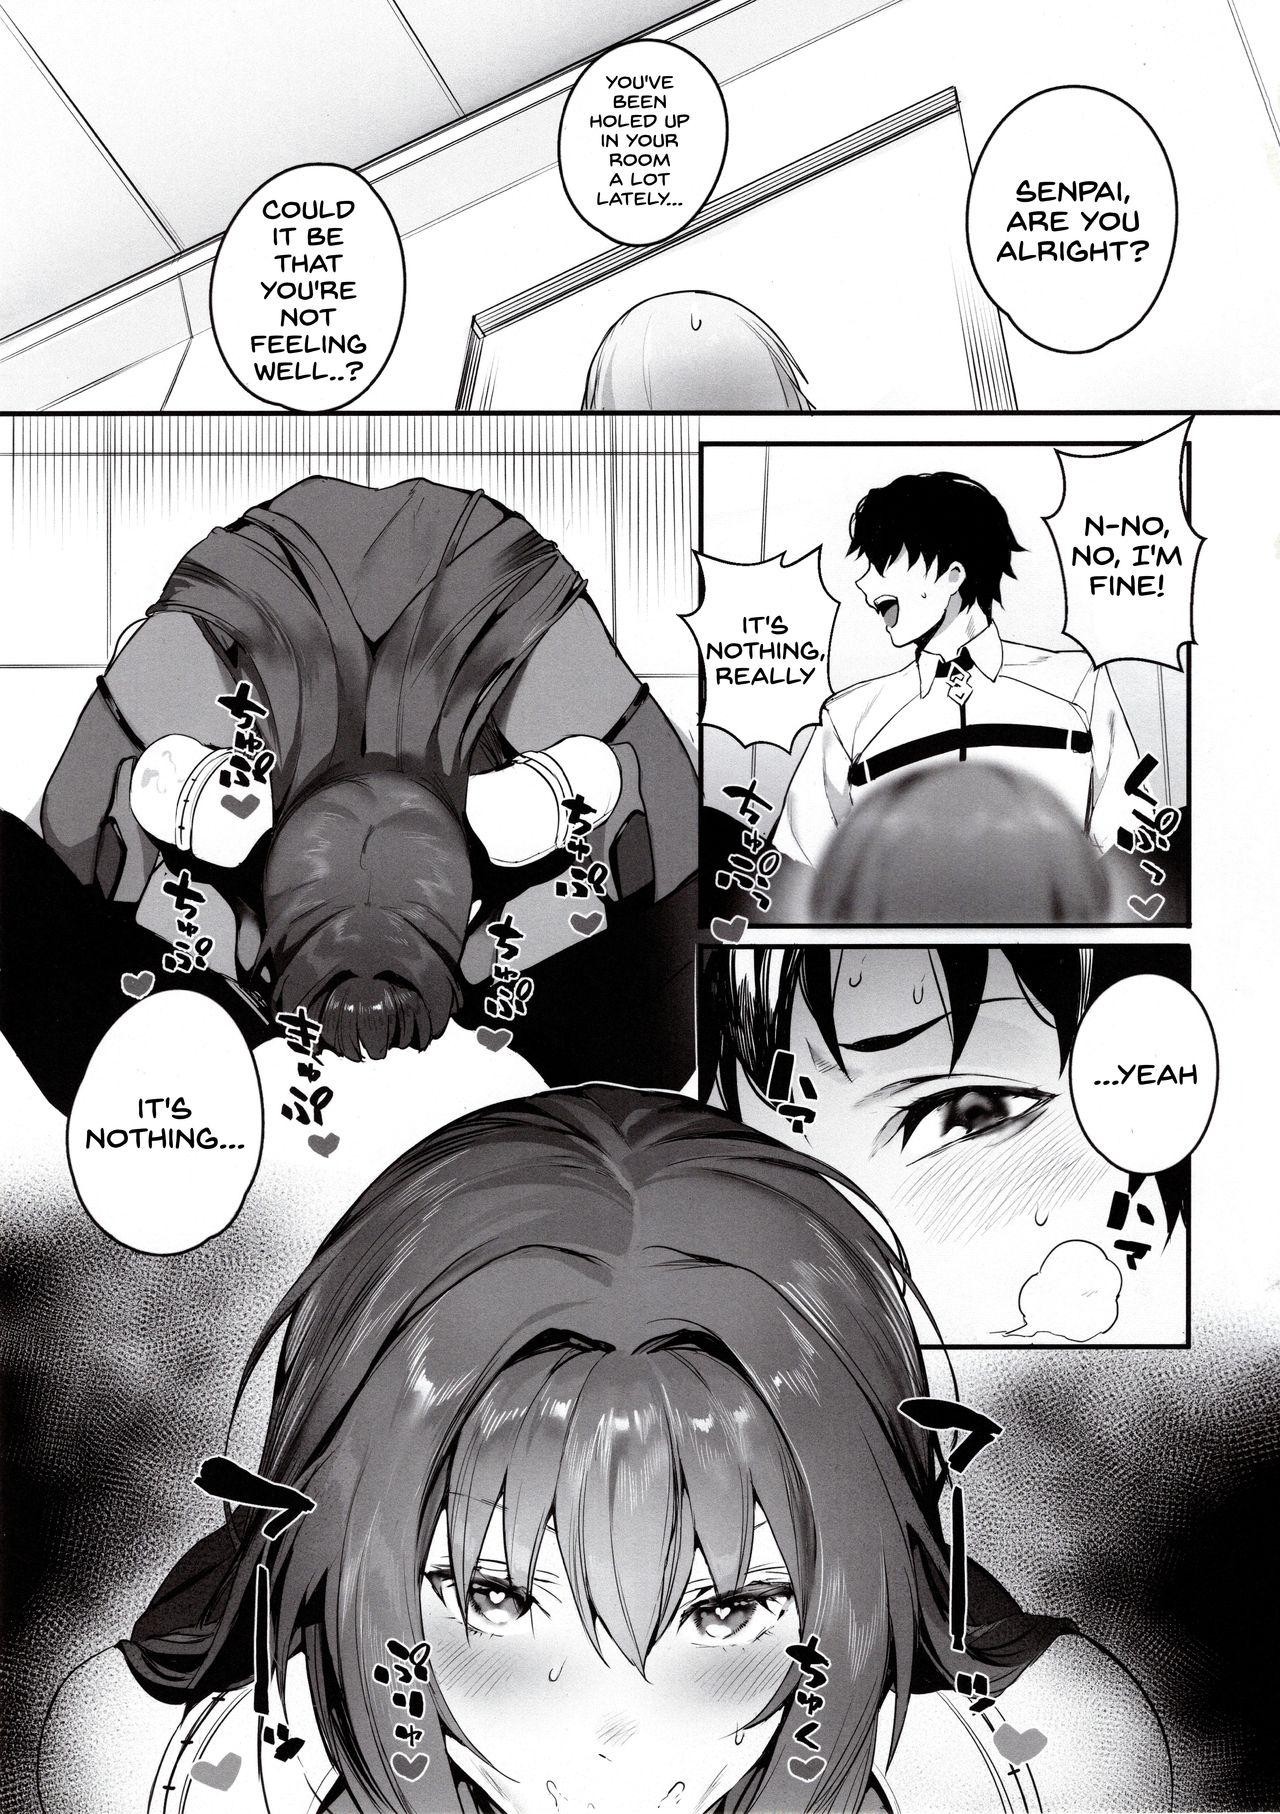 Cum MOVE ON UP - Fate grand order Namorada - Page 2